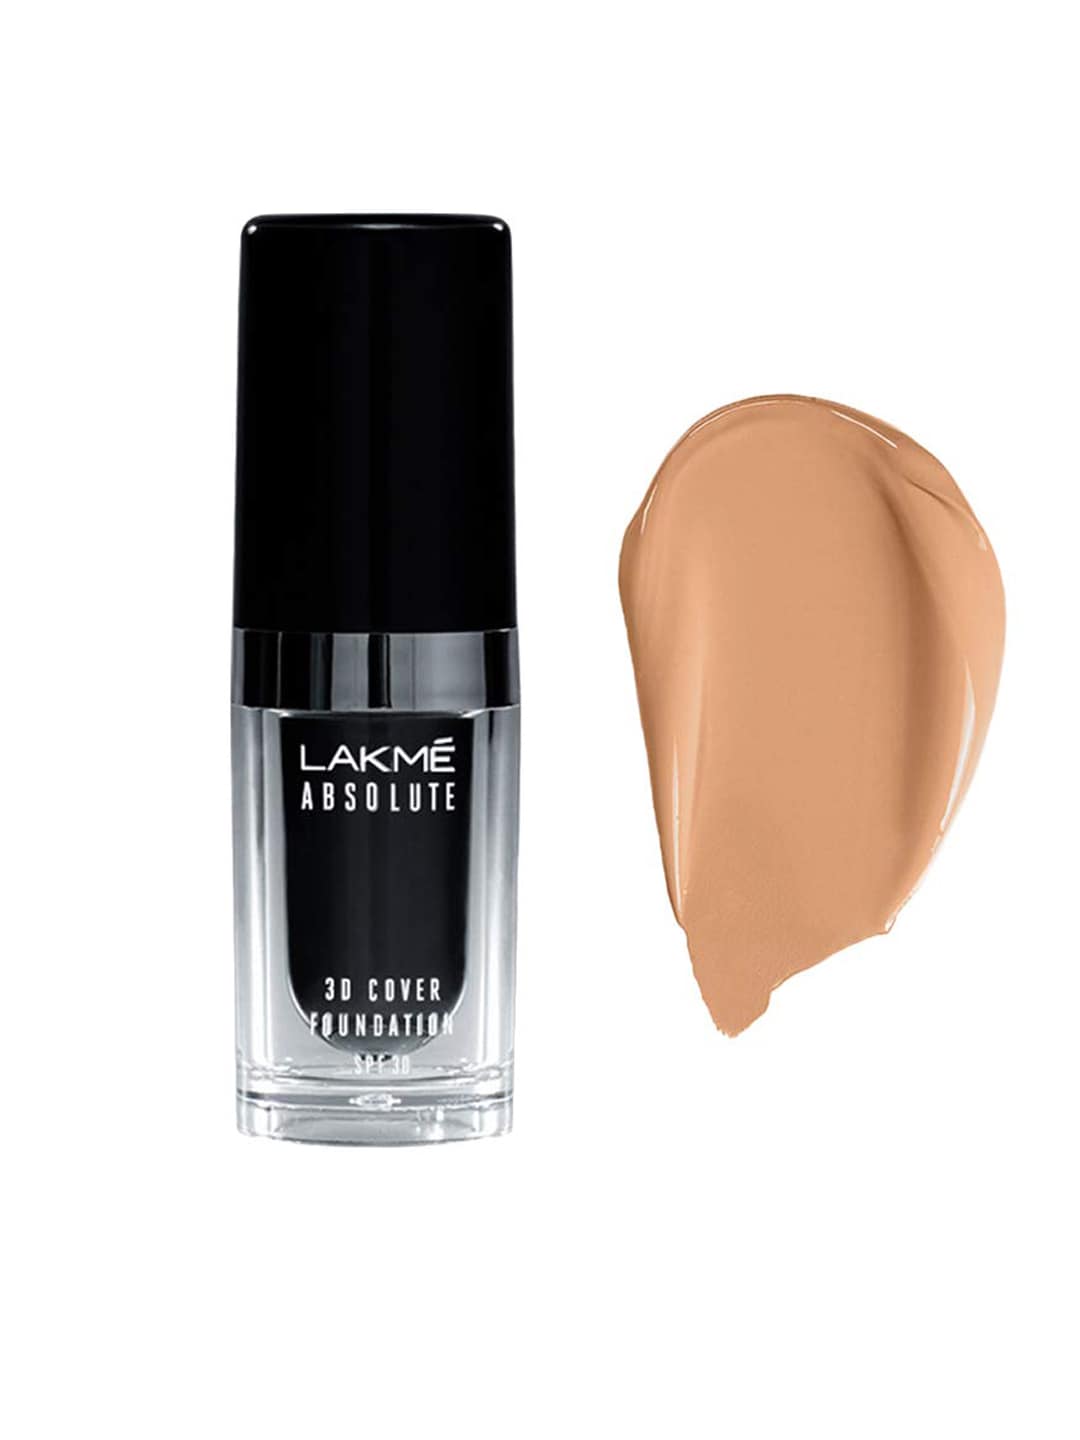 Lakme Absolute 3D Cover SPF 30 Foundation- Cool Cinnamon C300 Price in India